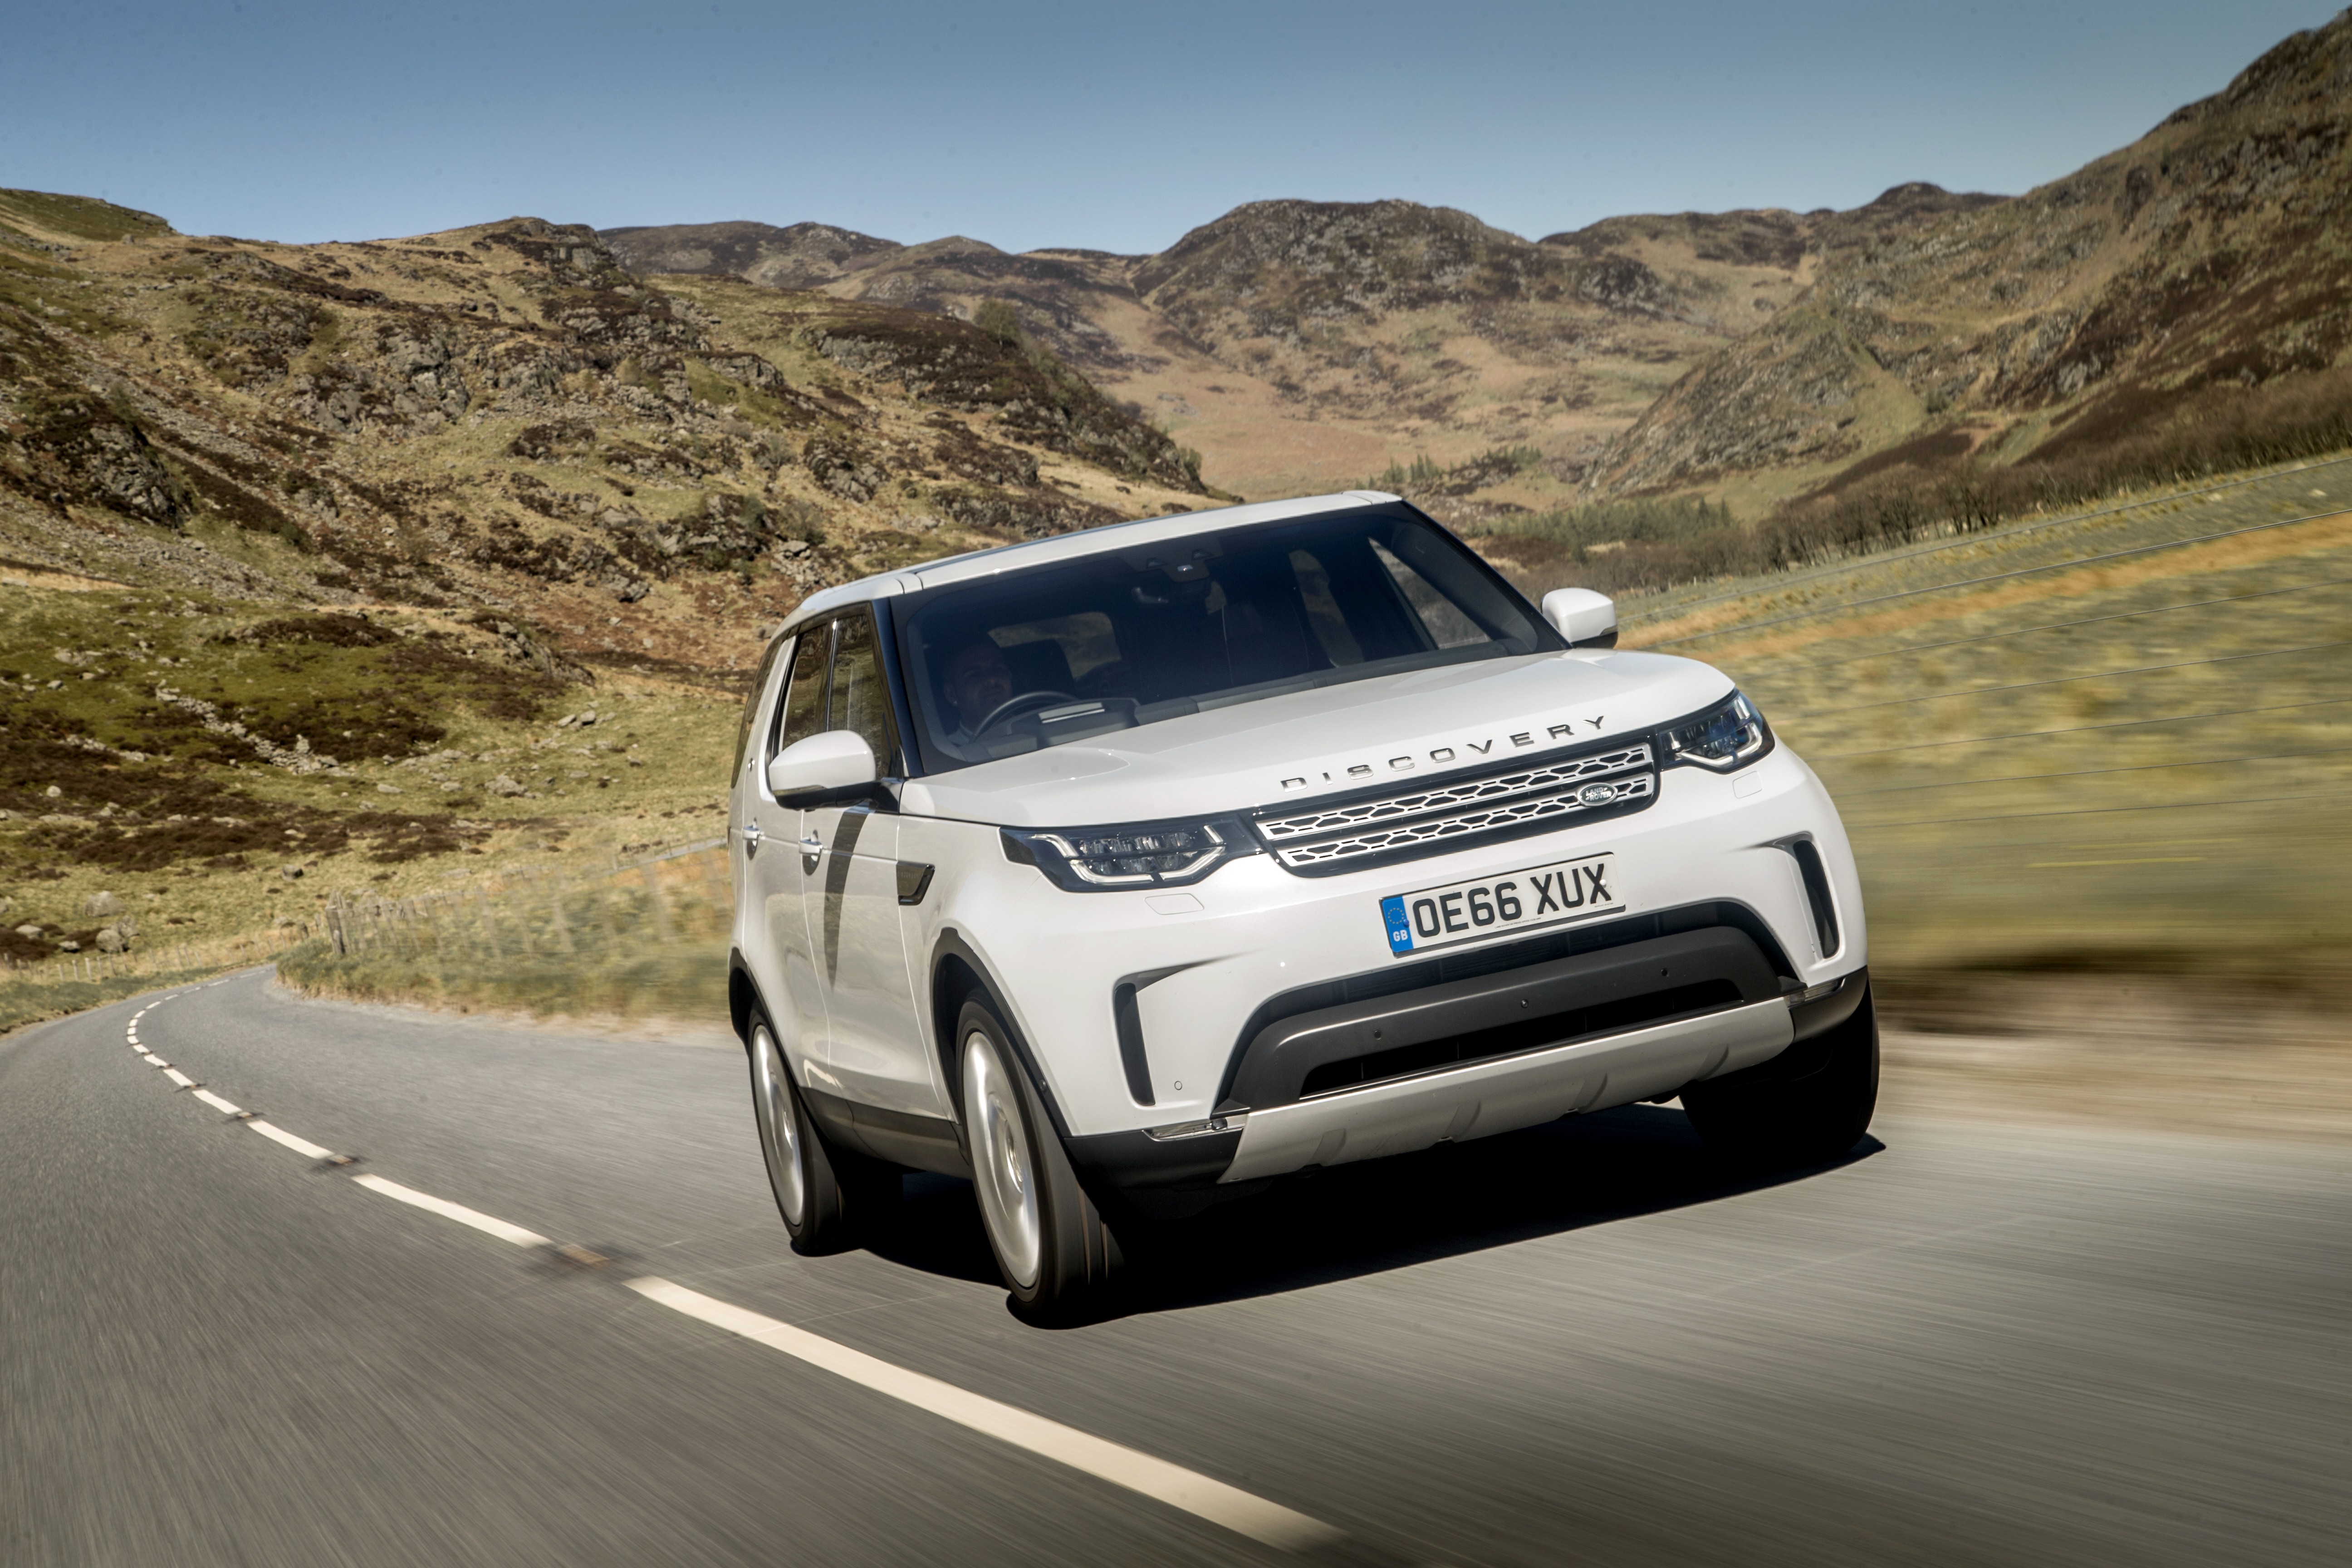 White Land Rover Discovery